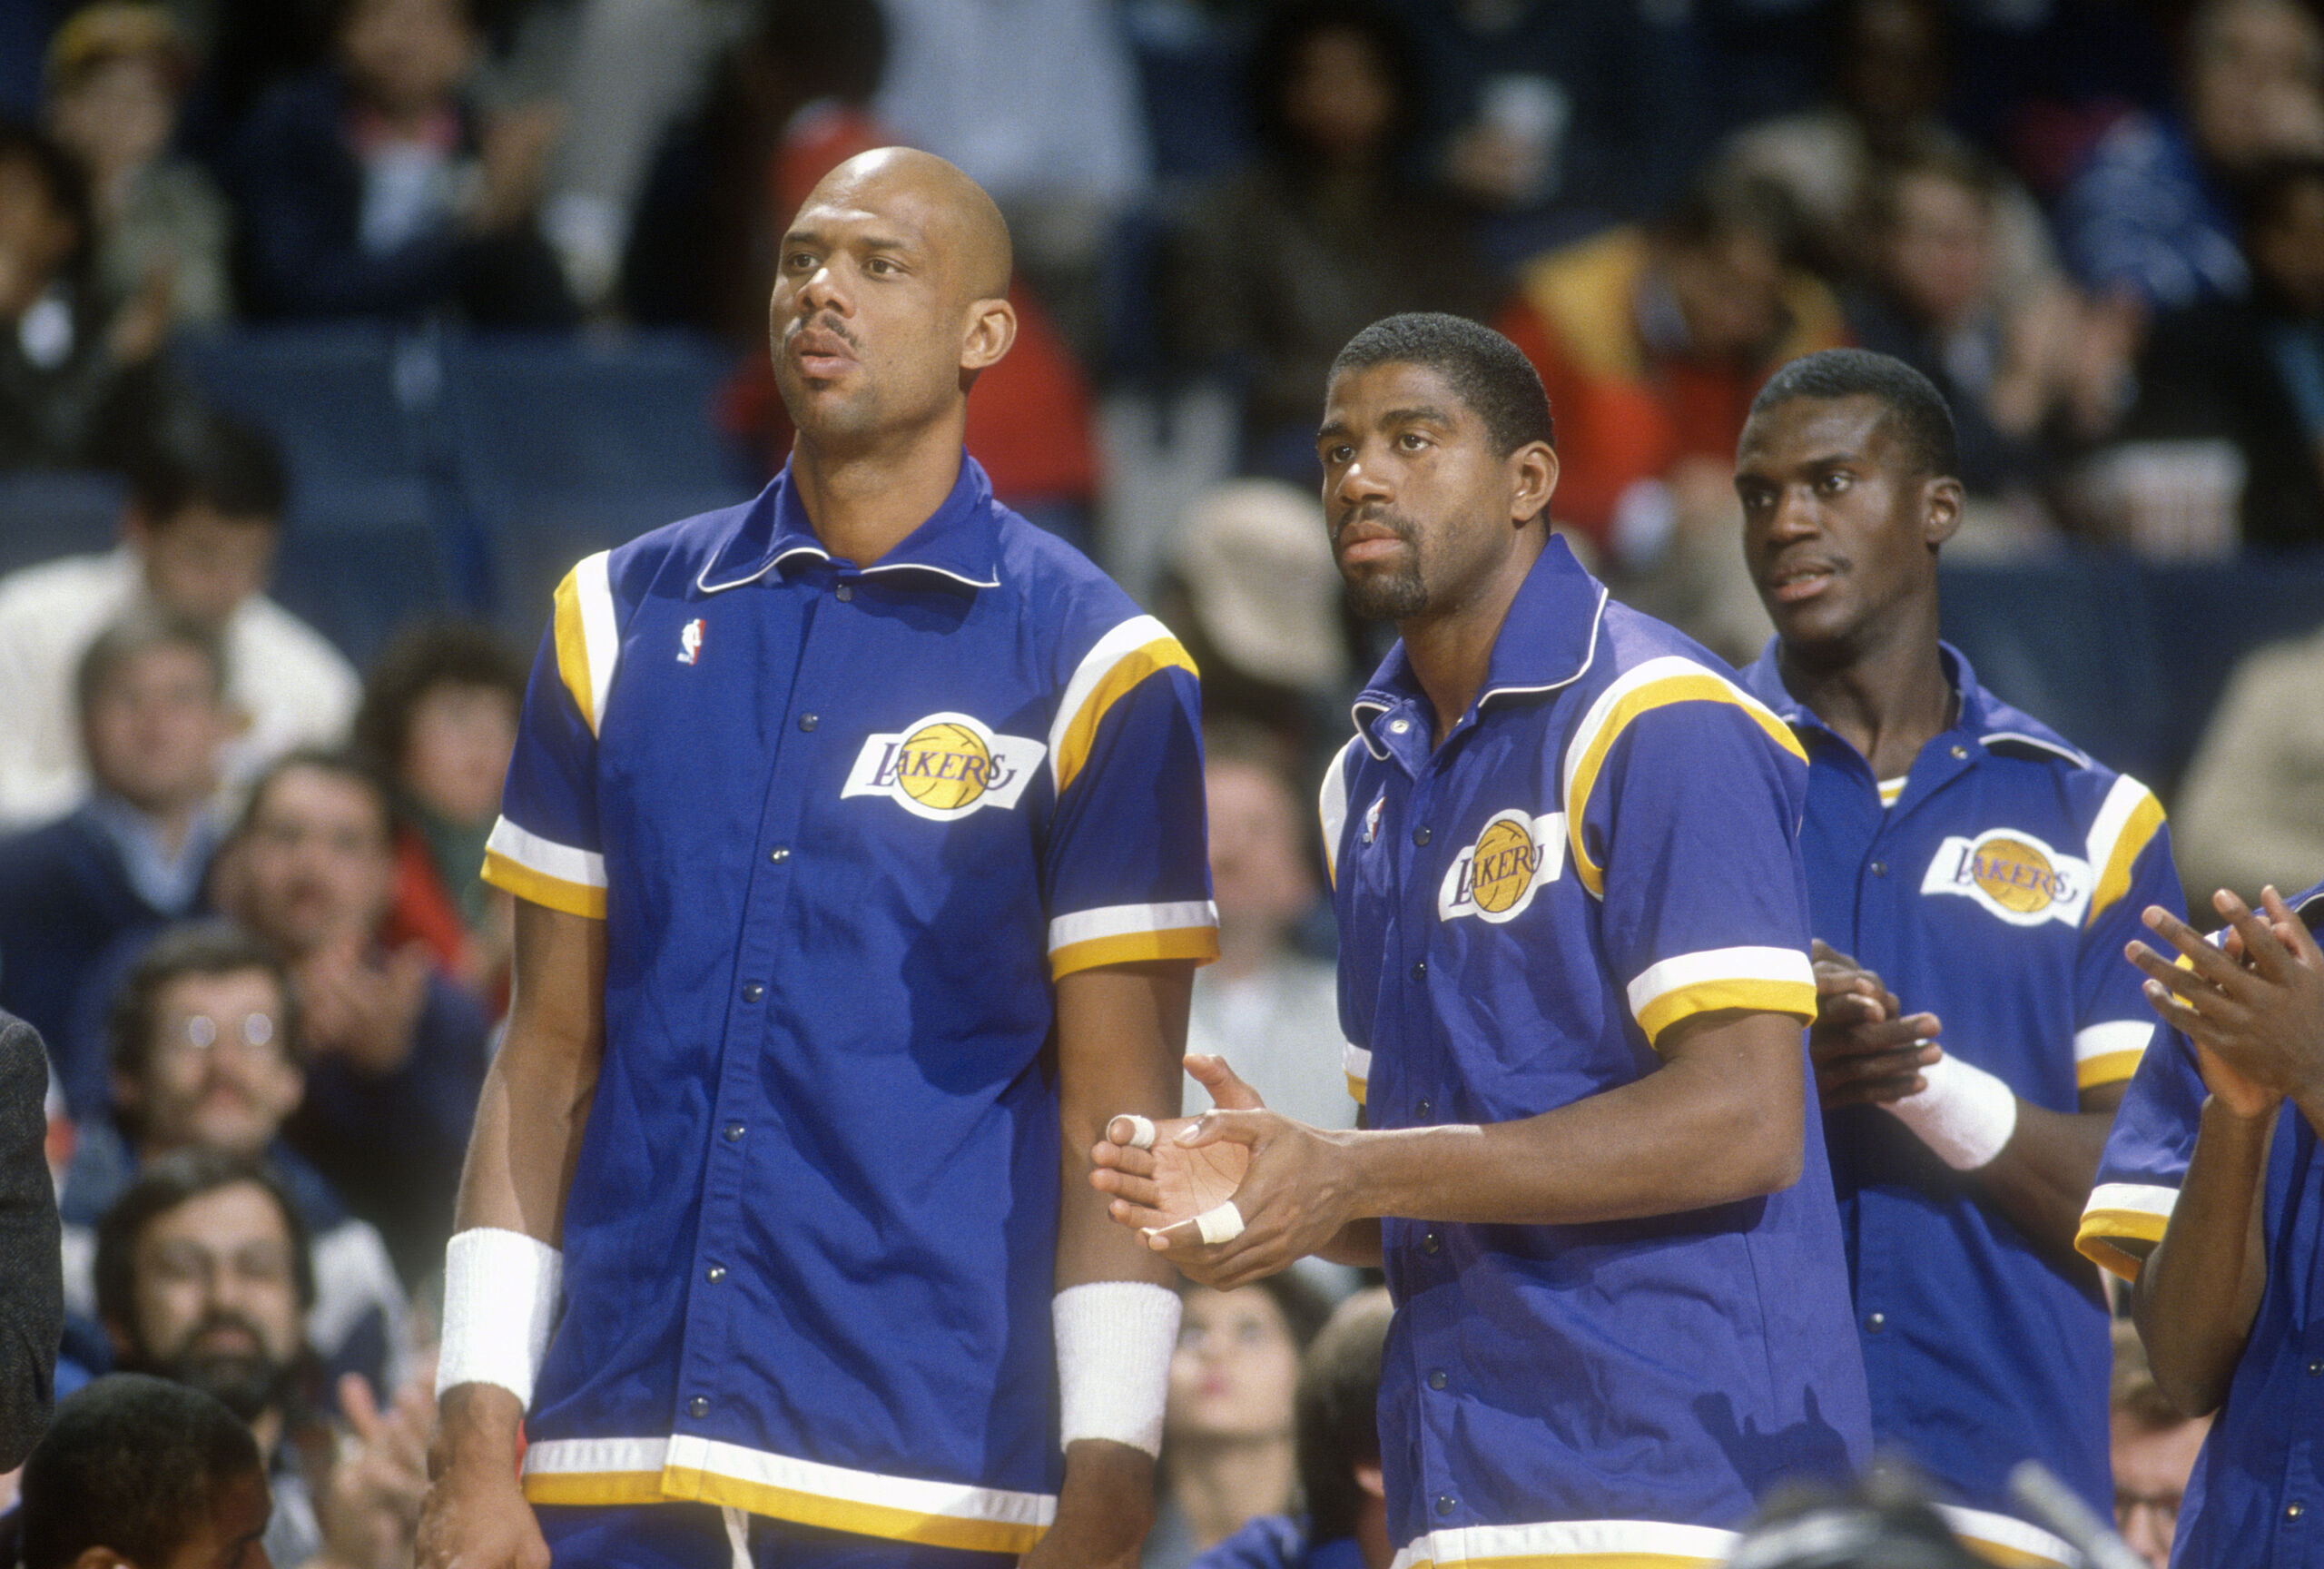 Showtime Lakers 35th anniversary: How the NBA's greatest dynasty was built